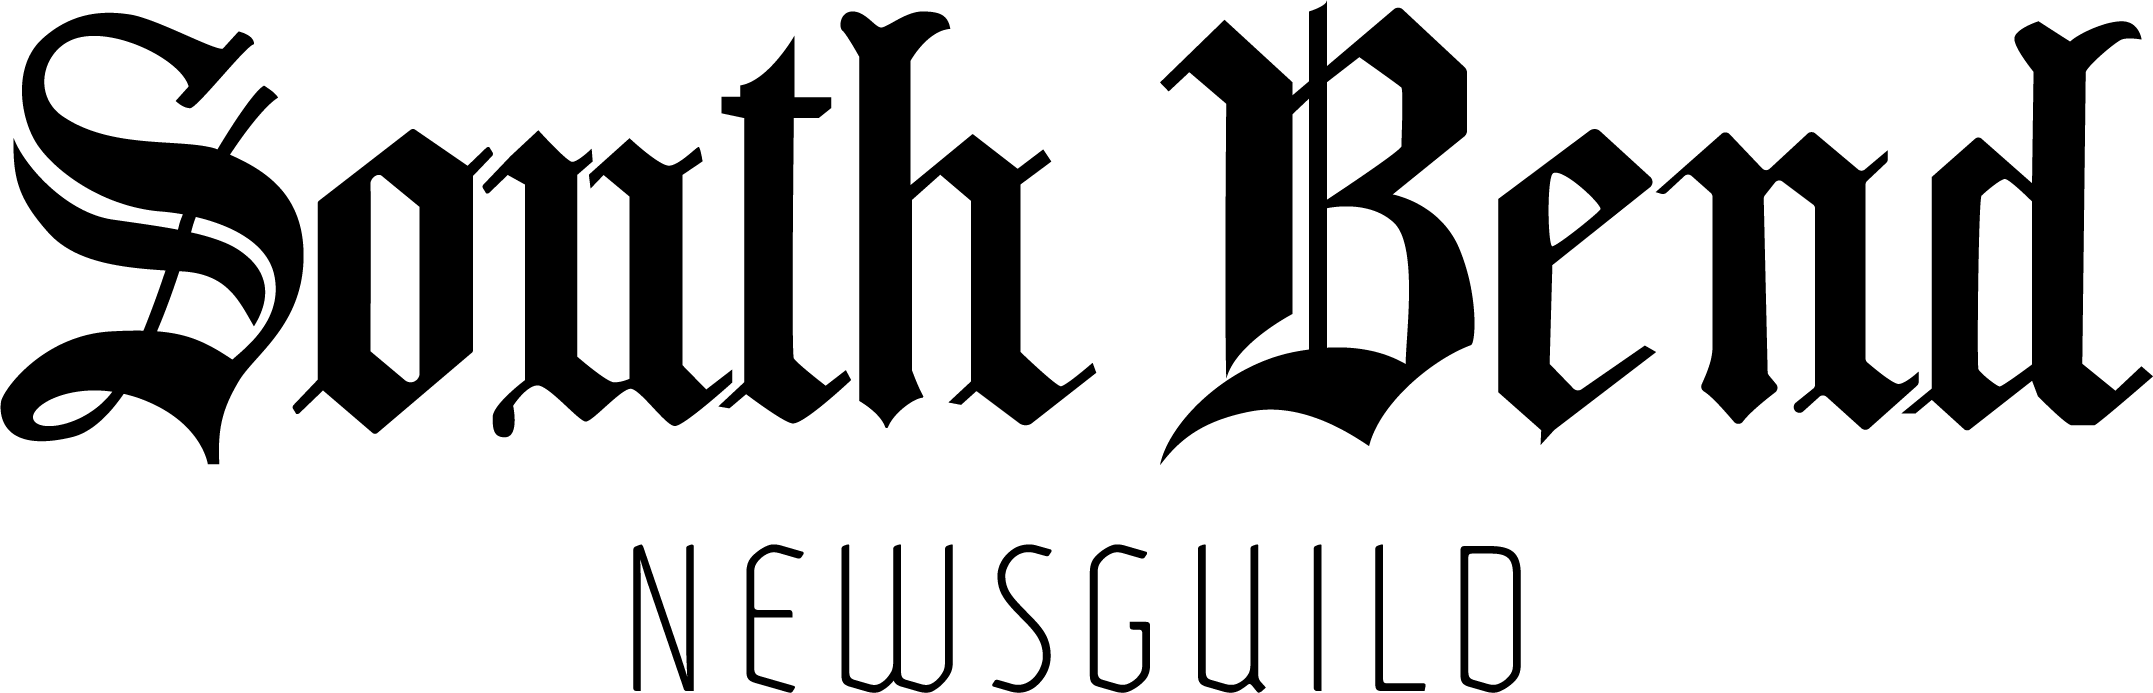 South Bend NewsGuild 